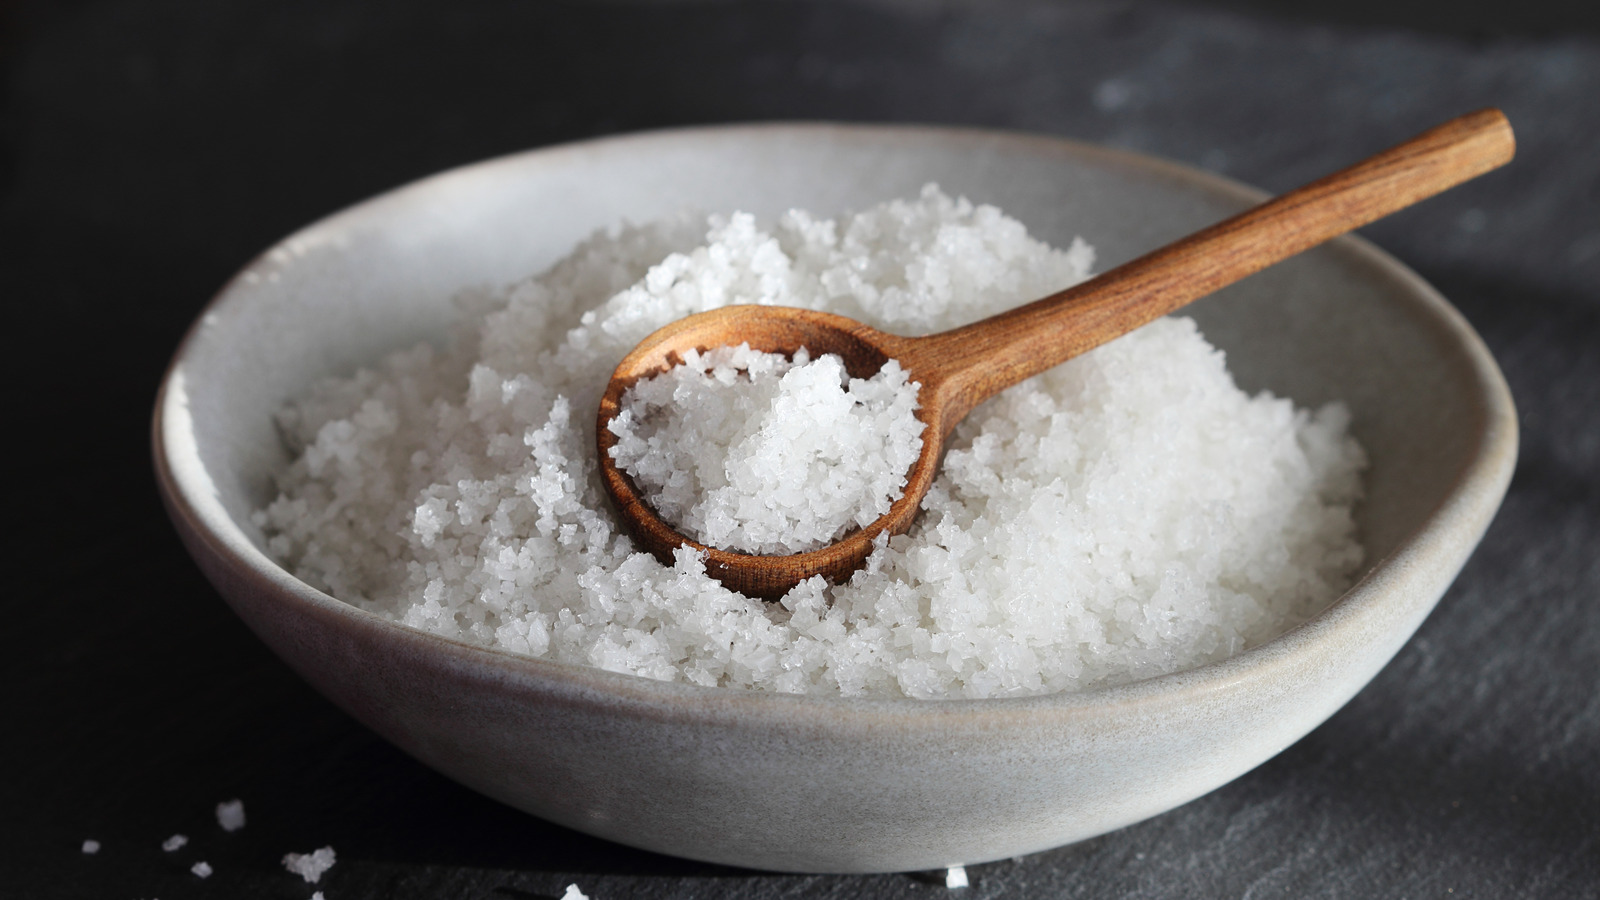 https://www.tastingtable.com/img/gallery/everything-you-need-to-know-about-salt/l-intro-1674742362.jpg